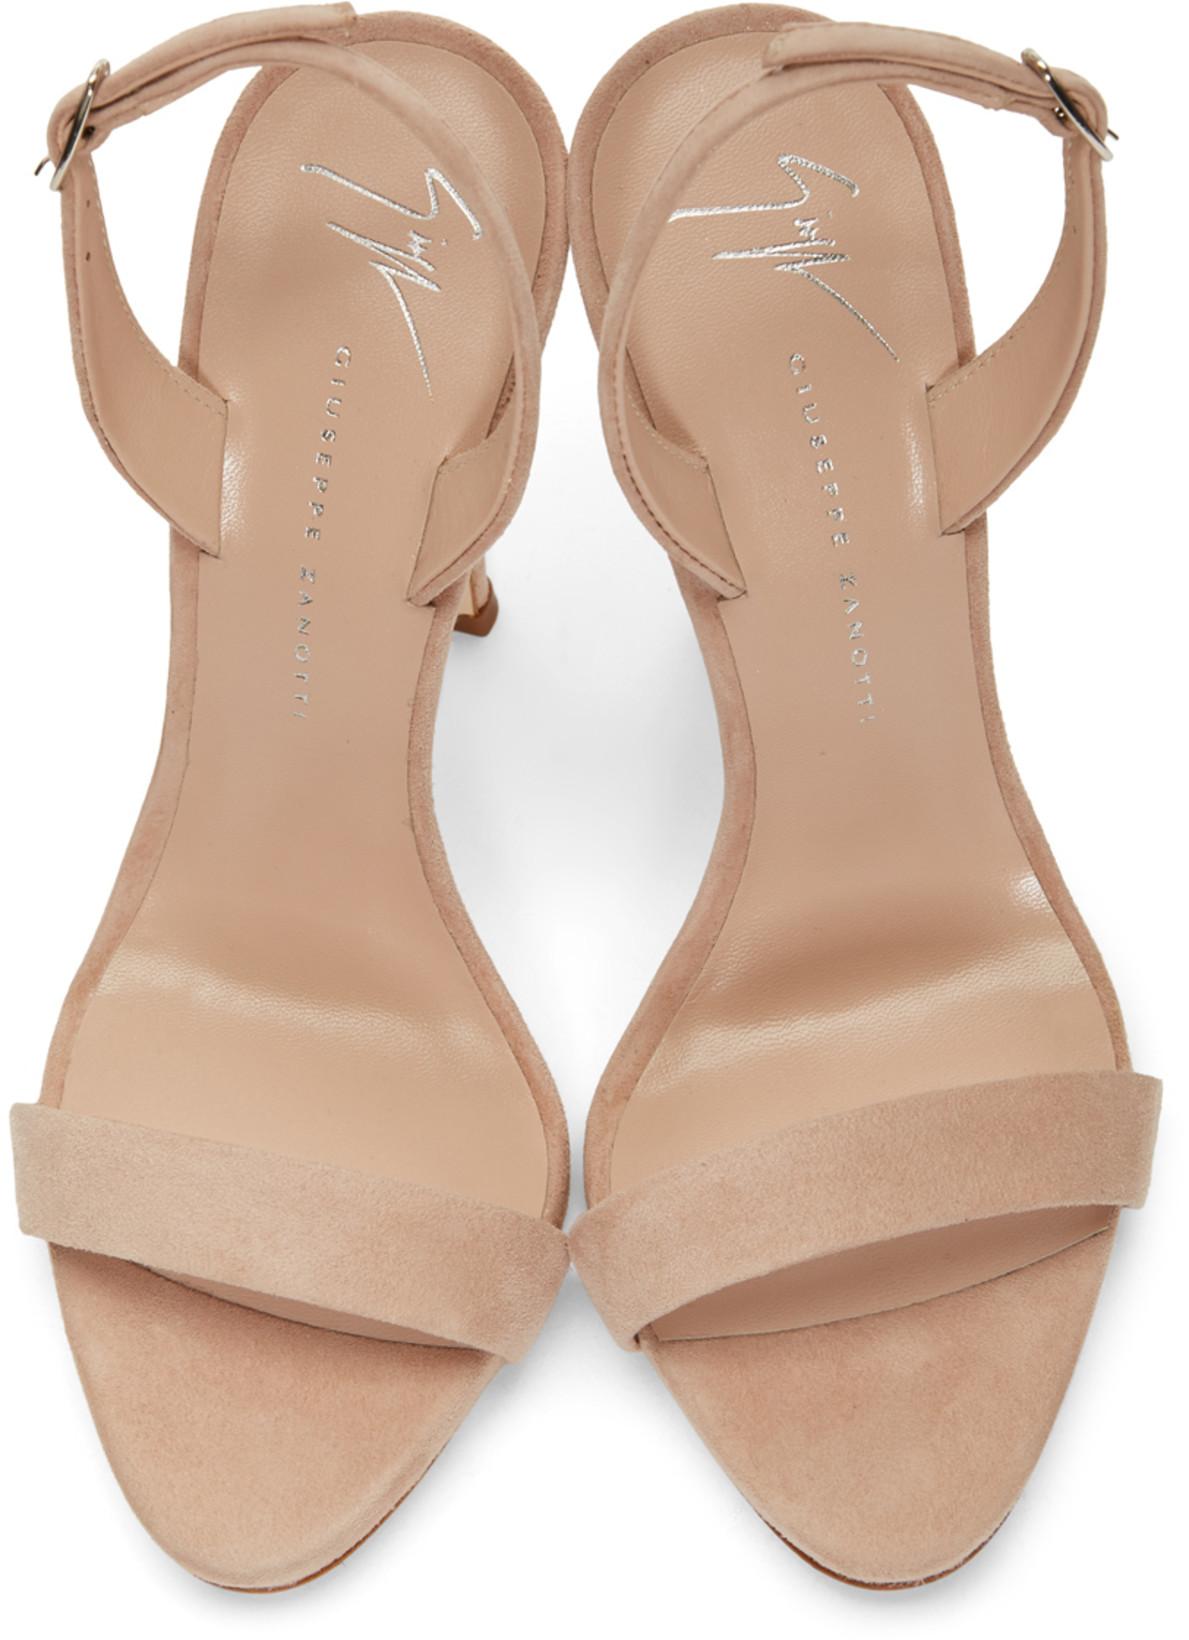 Giuseppe Zanotti NEW Tan Nude Beige Suede Strappy Evening Sandals Heels in Box

Size IT 36.5
Suede
Ankle zip closure
Made in Italy
Heels height 4.75